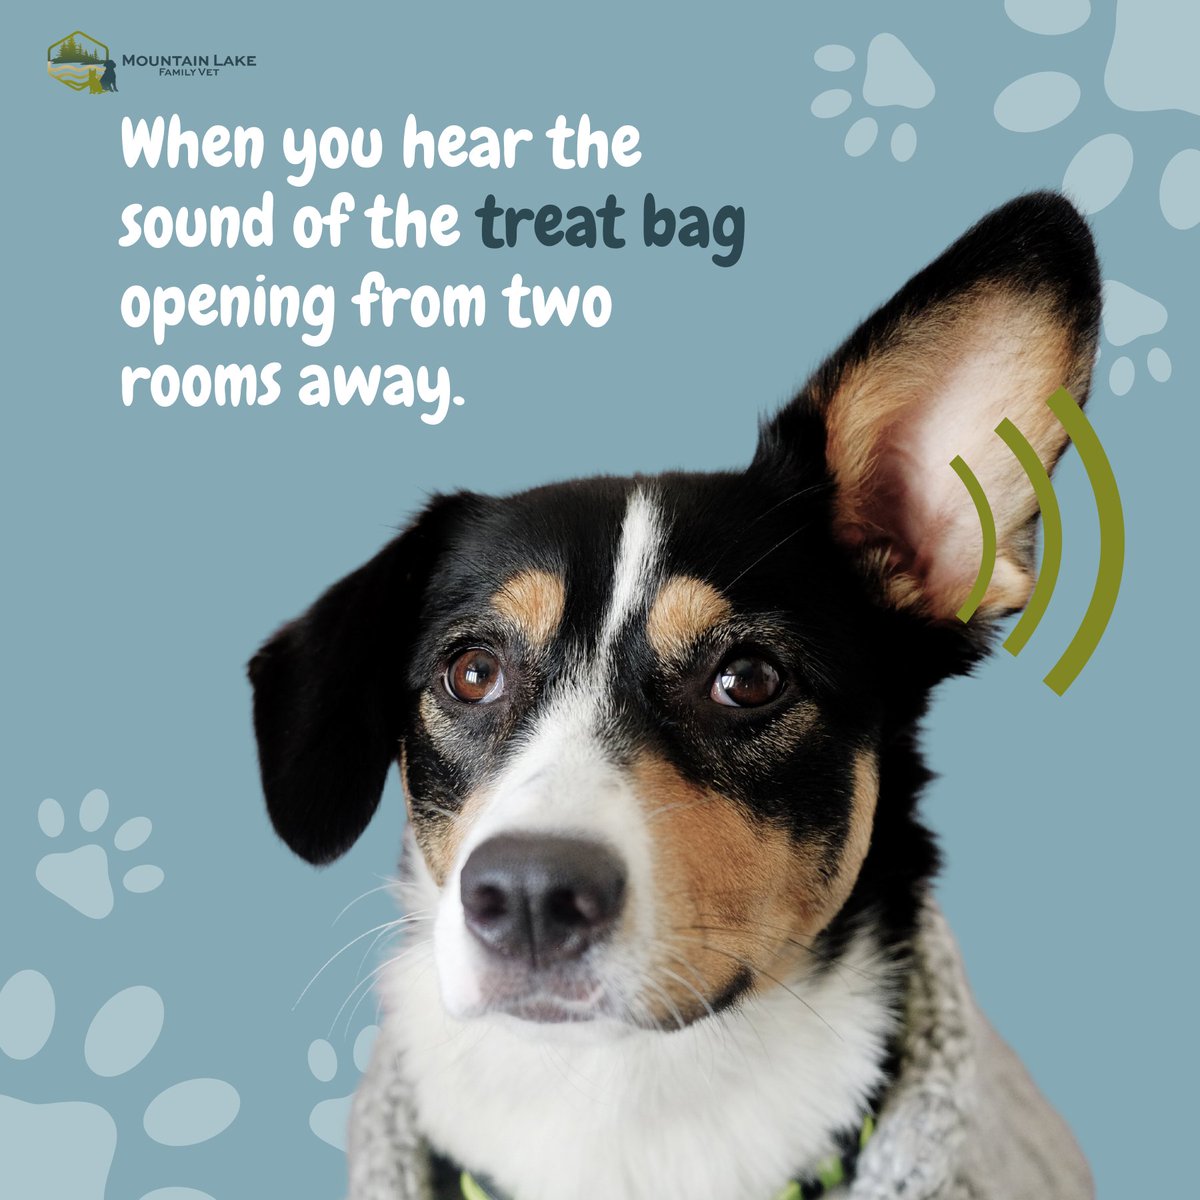 Caption this... we'll go first: When you hear the sound of the treat bag opening from two rooms away. 👀👂 Your turn! #petmemes #dogmemes